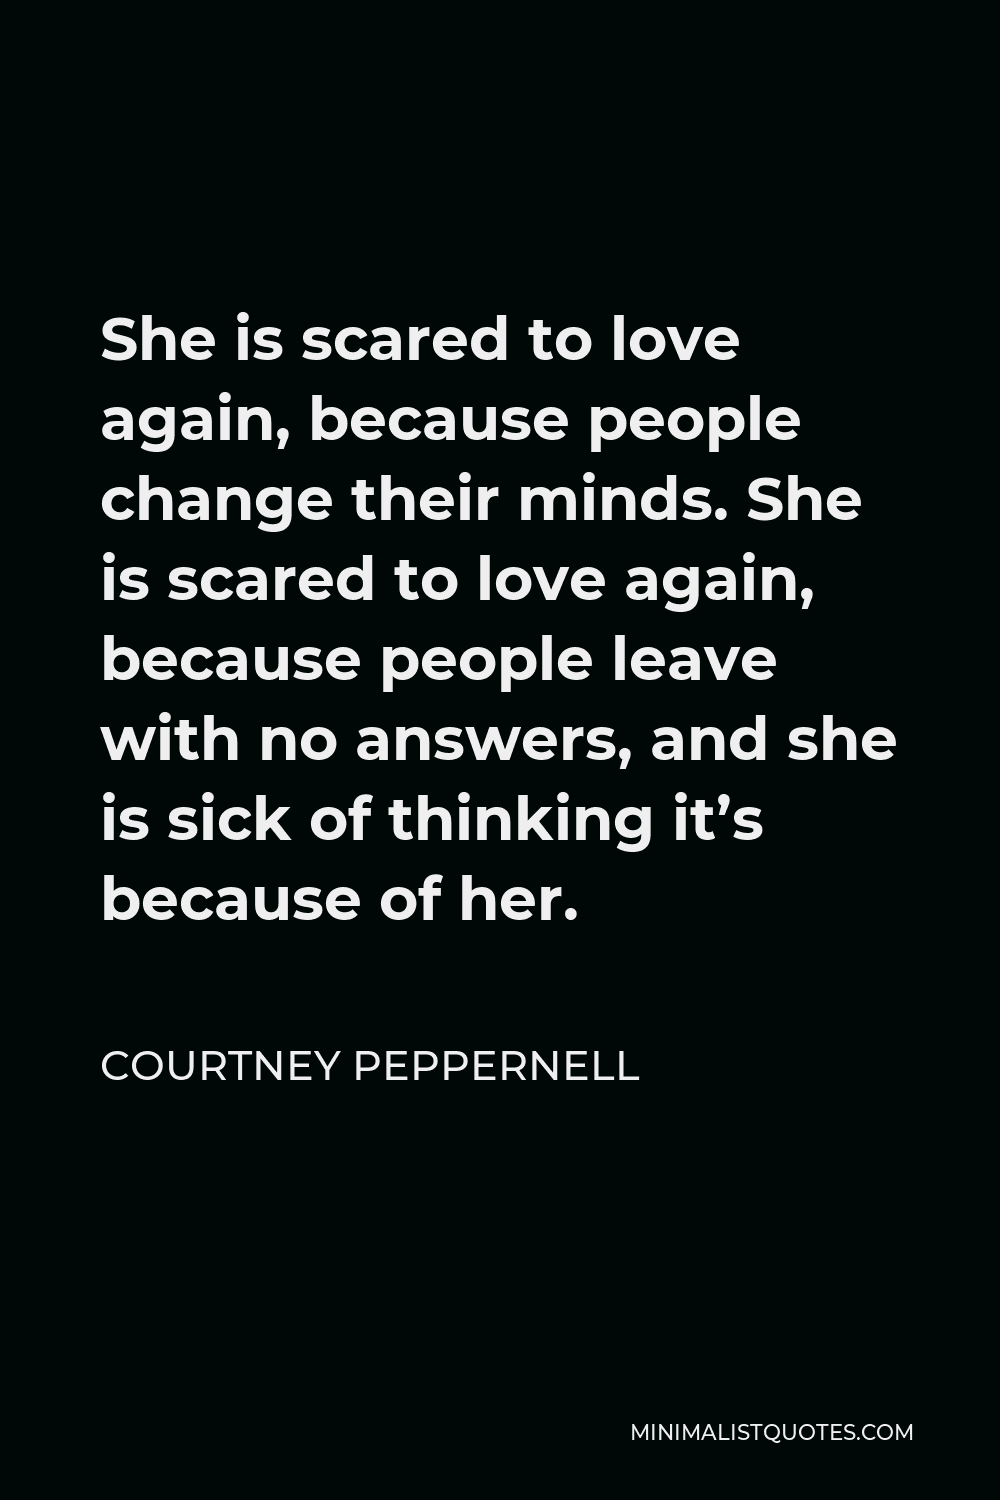 Courtney Peppernell Quote - She is scared to love again, because people change their minds. She is scared to love again, because people leave with no answers, and she is sick of thinking it’s because of her.